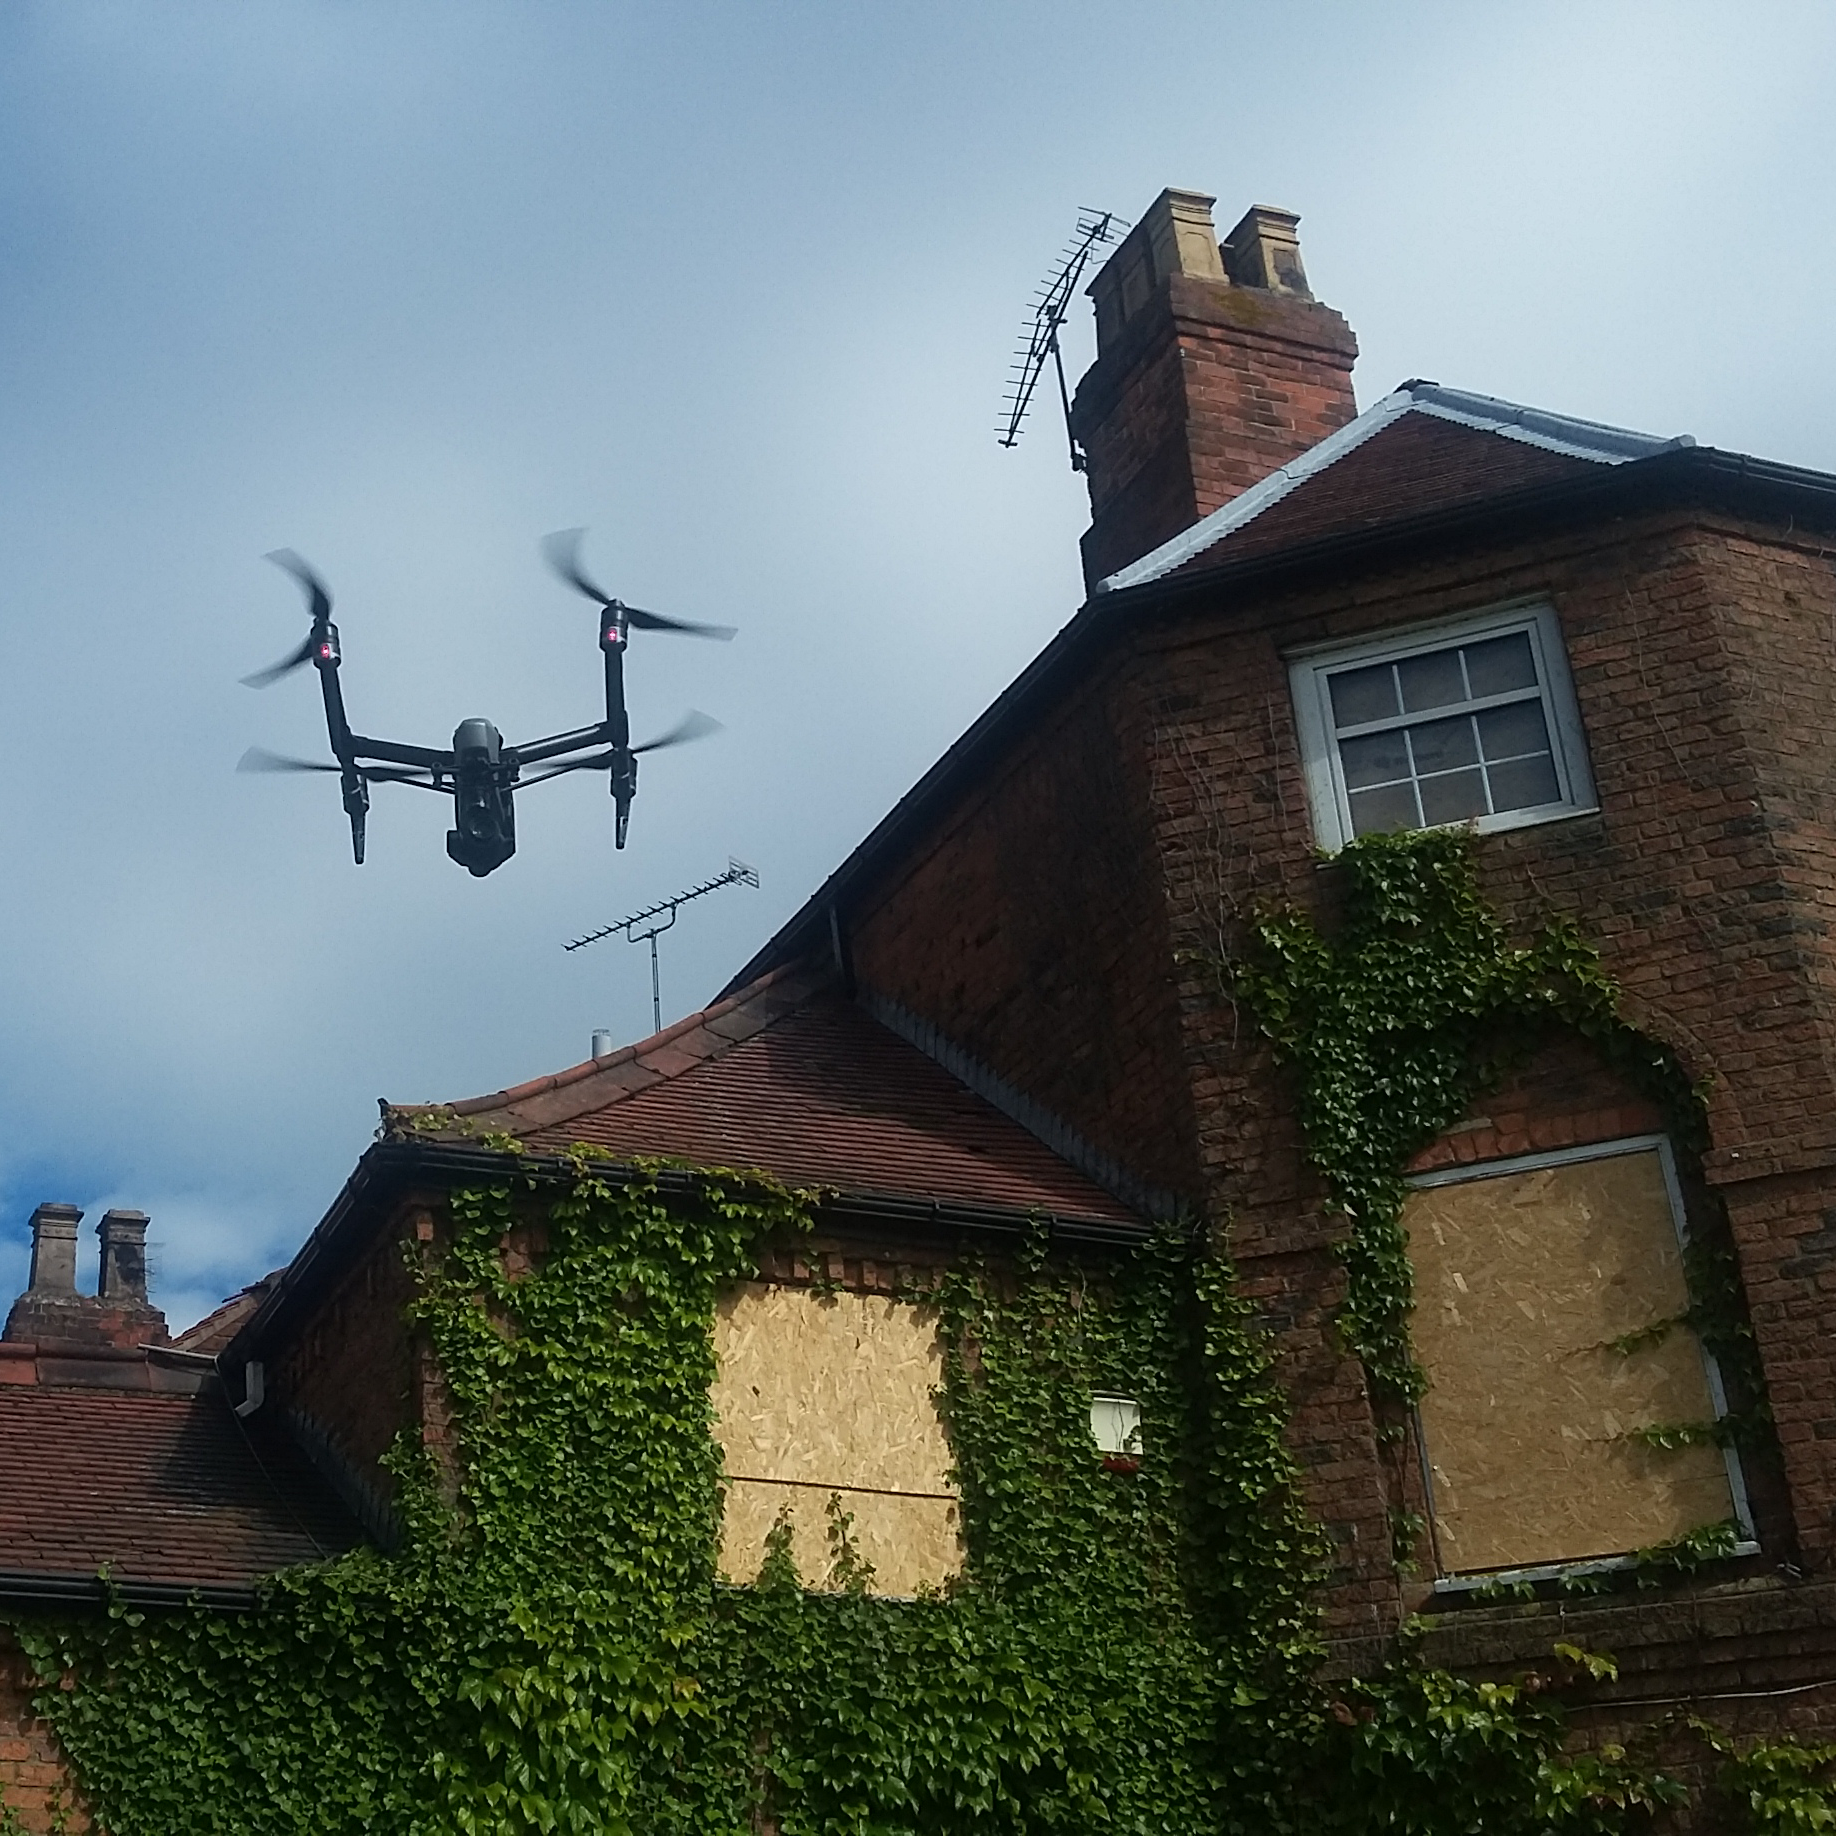 Drone flying over old building